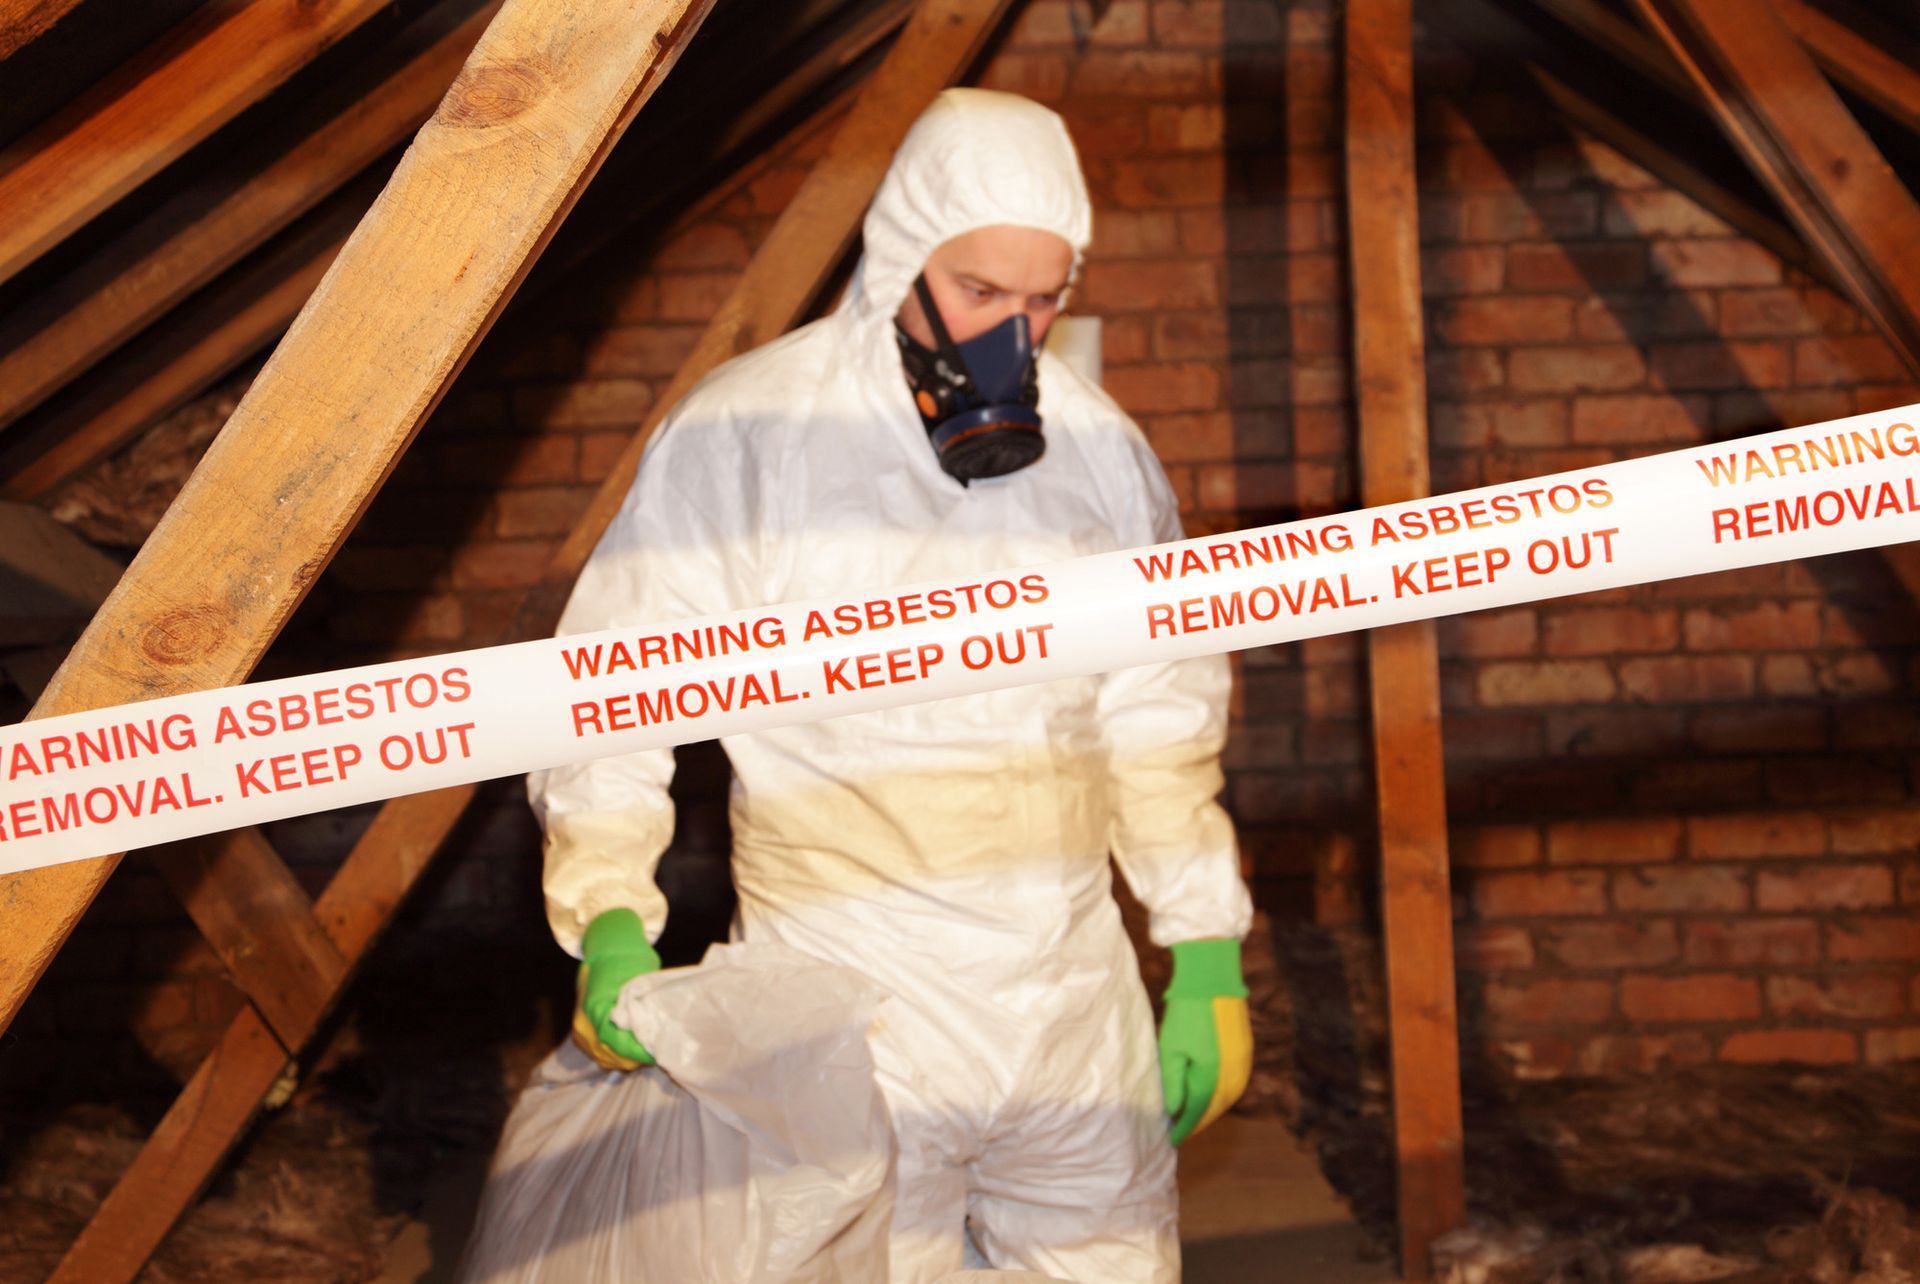 Worker in protective equipment removing asbestos from a loft